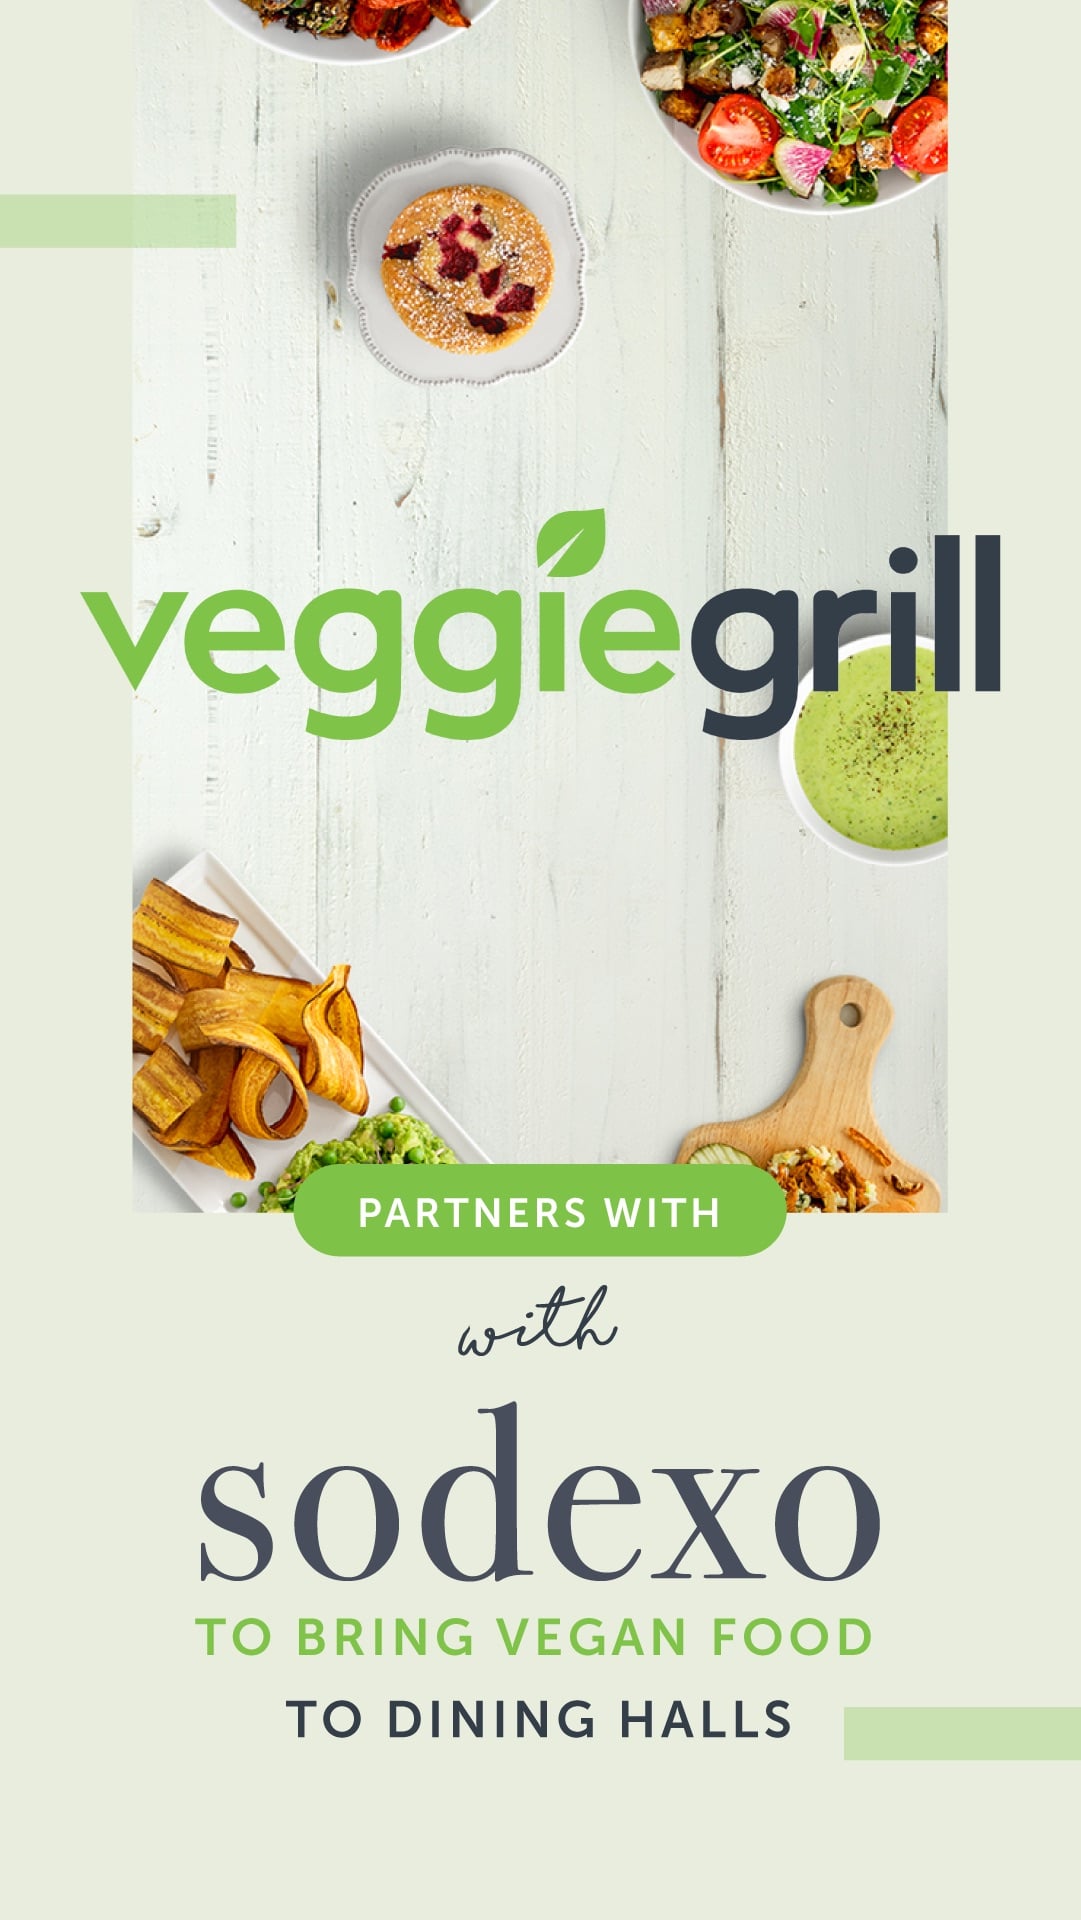 Veggie Grill Partners With Sodexo to Bring Vegan Food to Dining Halls